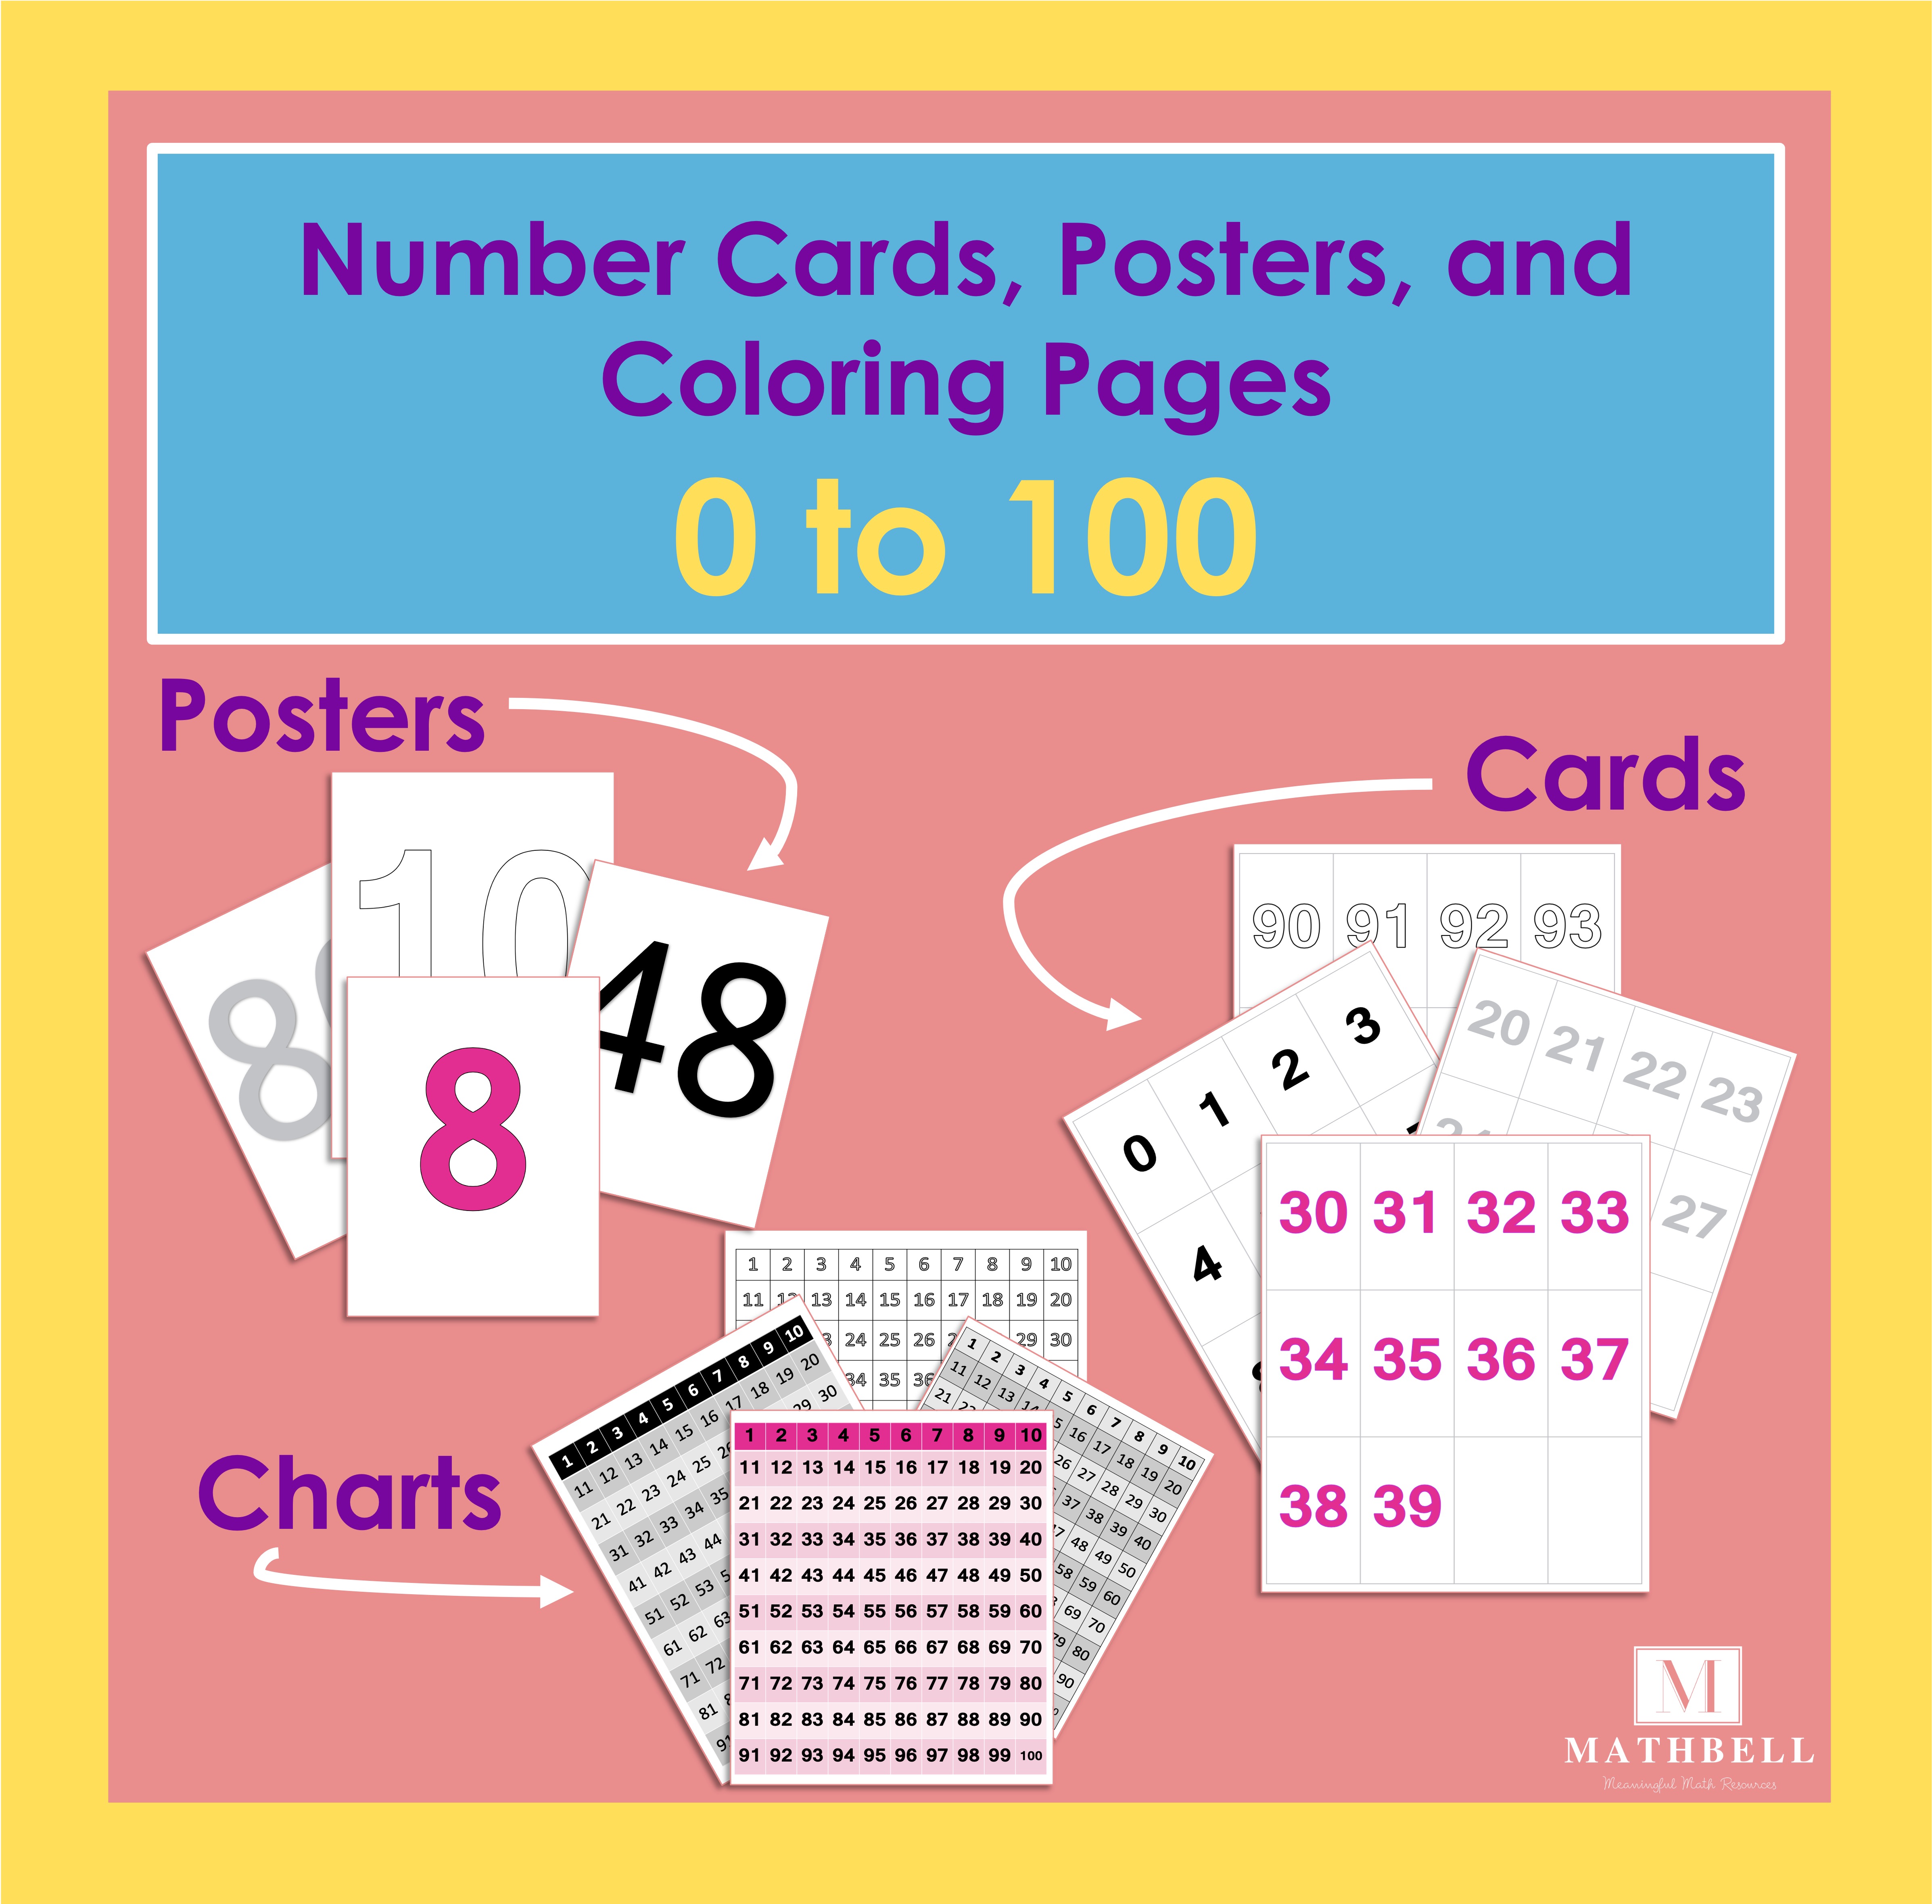 number-cards-posters-and-coloring-pages-0-to-100